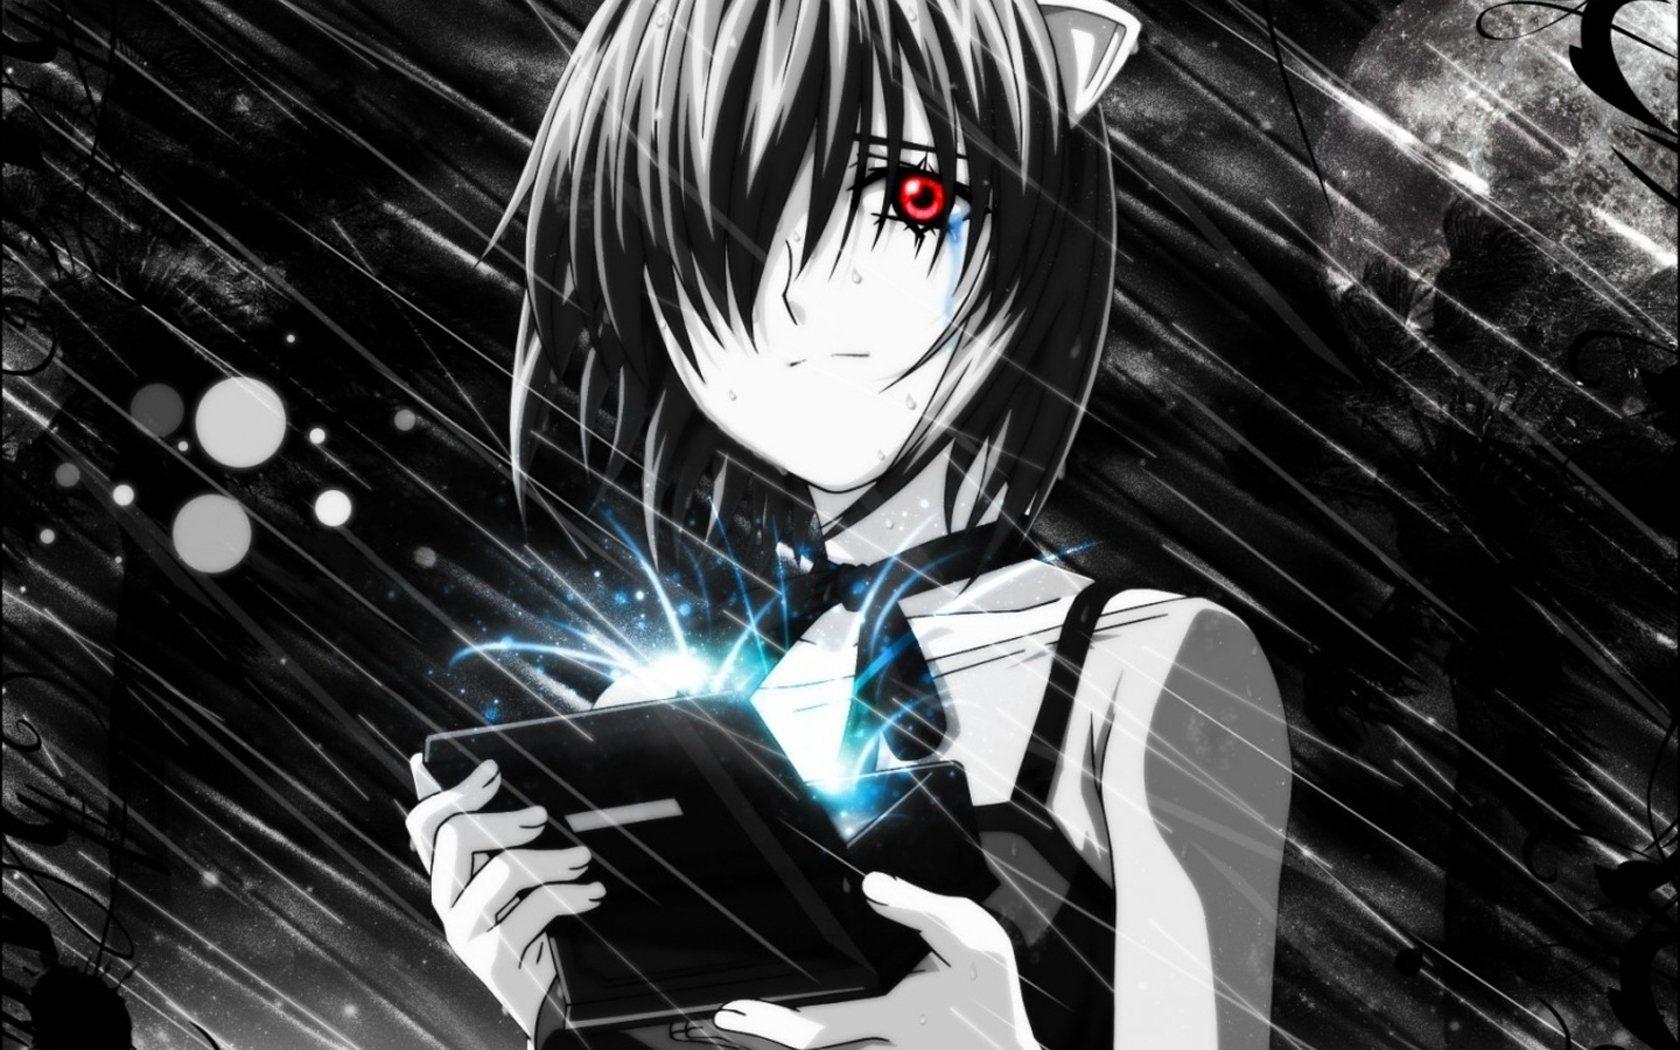 Lucy From Elfen Lied Wallpapers